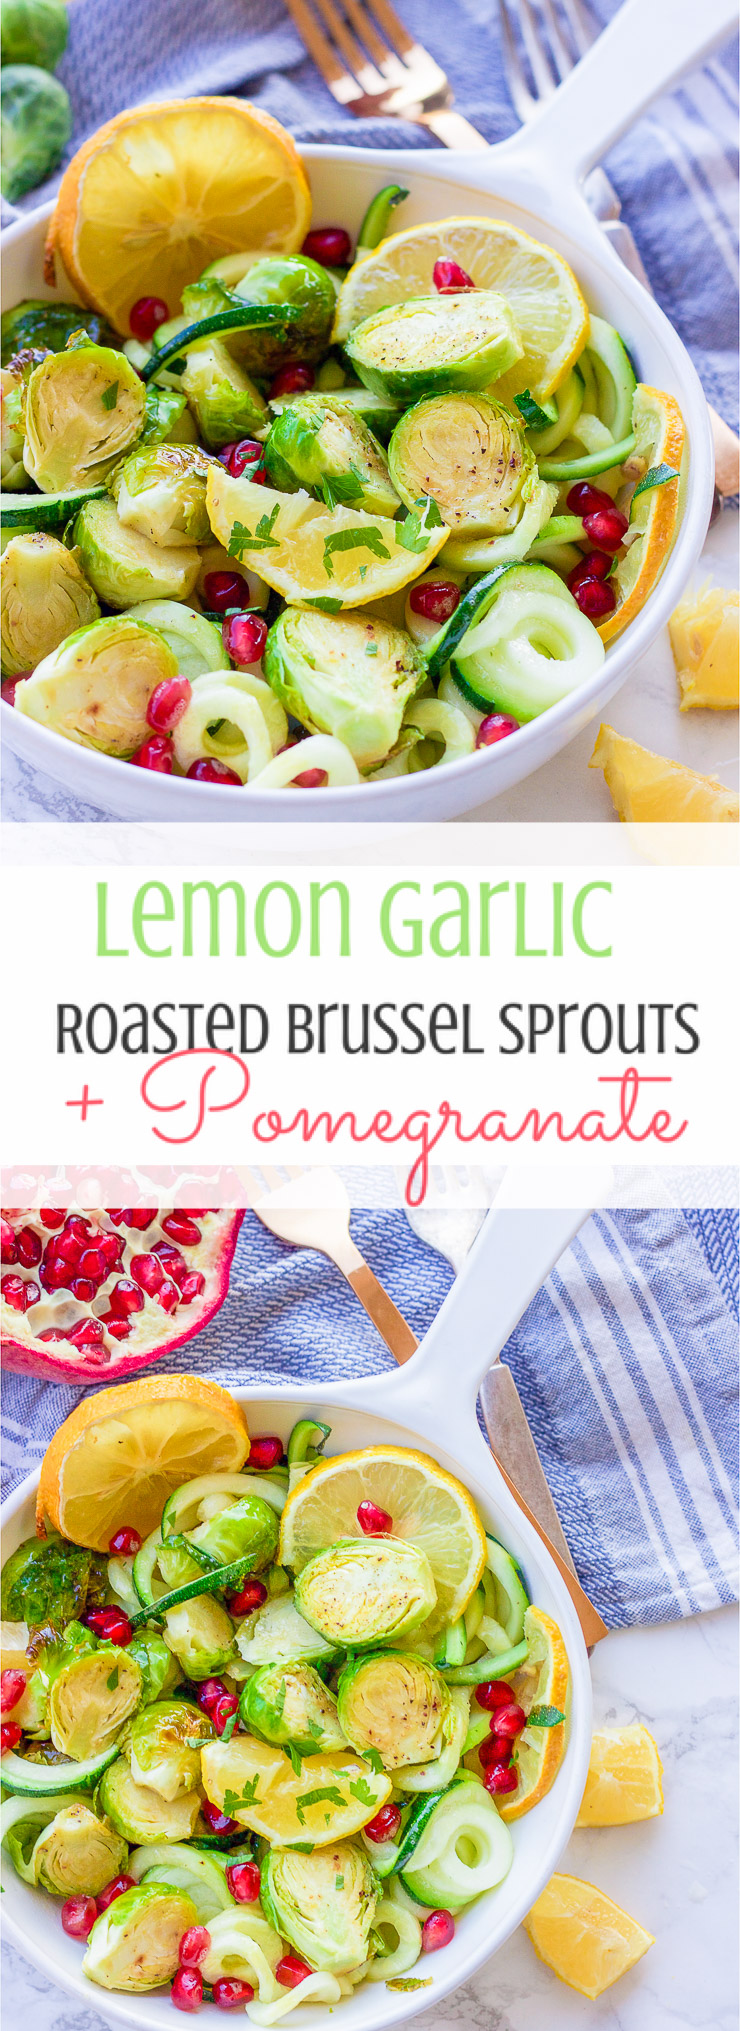 This lemon garlic roasted brussel sprouts + zucchini recipe is a clean, crisp, savory vegetable dish that is not only healthy but a gorgeous and easy addition to any meal!  Lemon, honey, and garlic flavors coat the roasted brussel sprouts, zucchini noodles, and pomegranate arils for a colorful fresh salad.